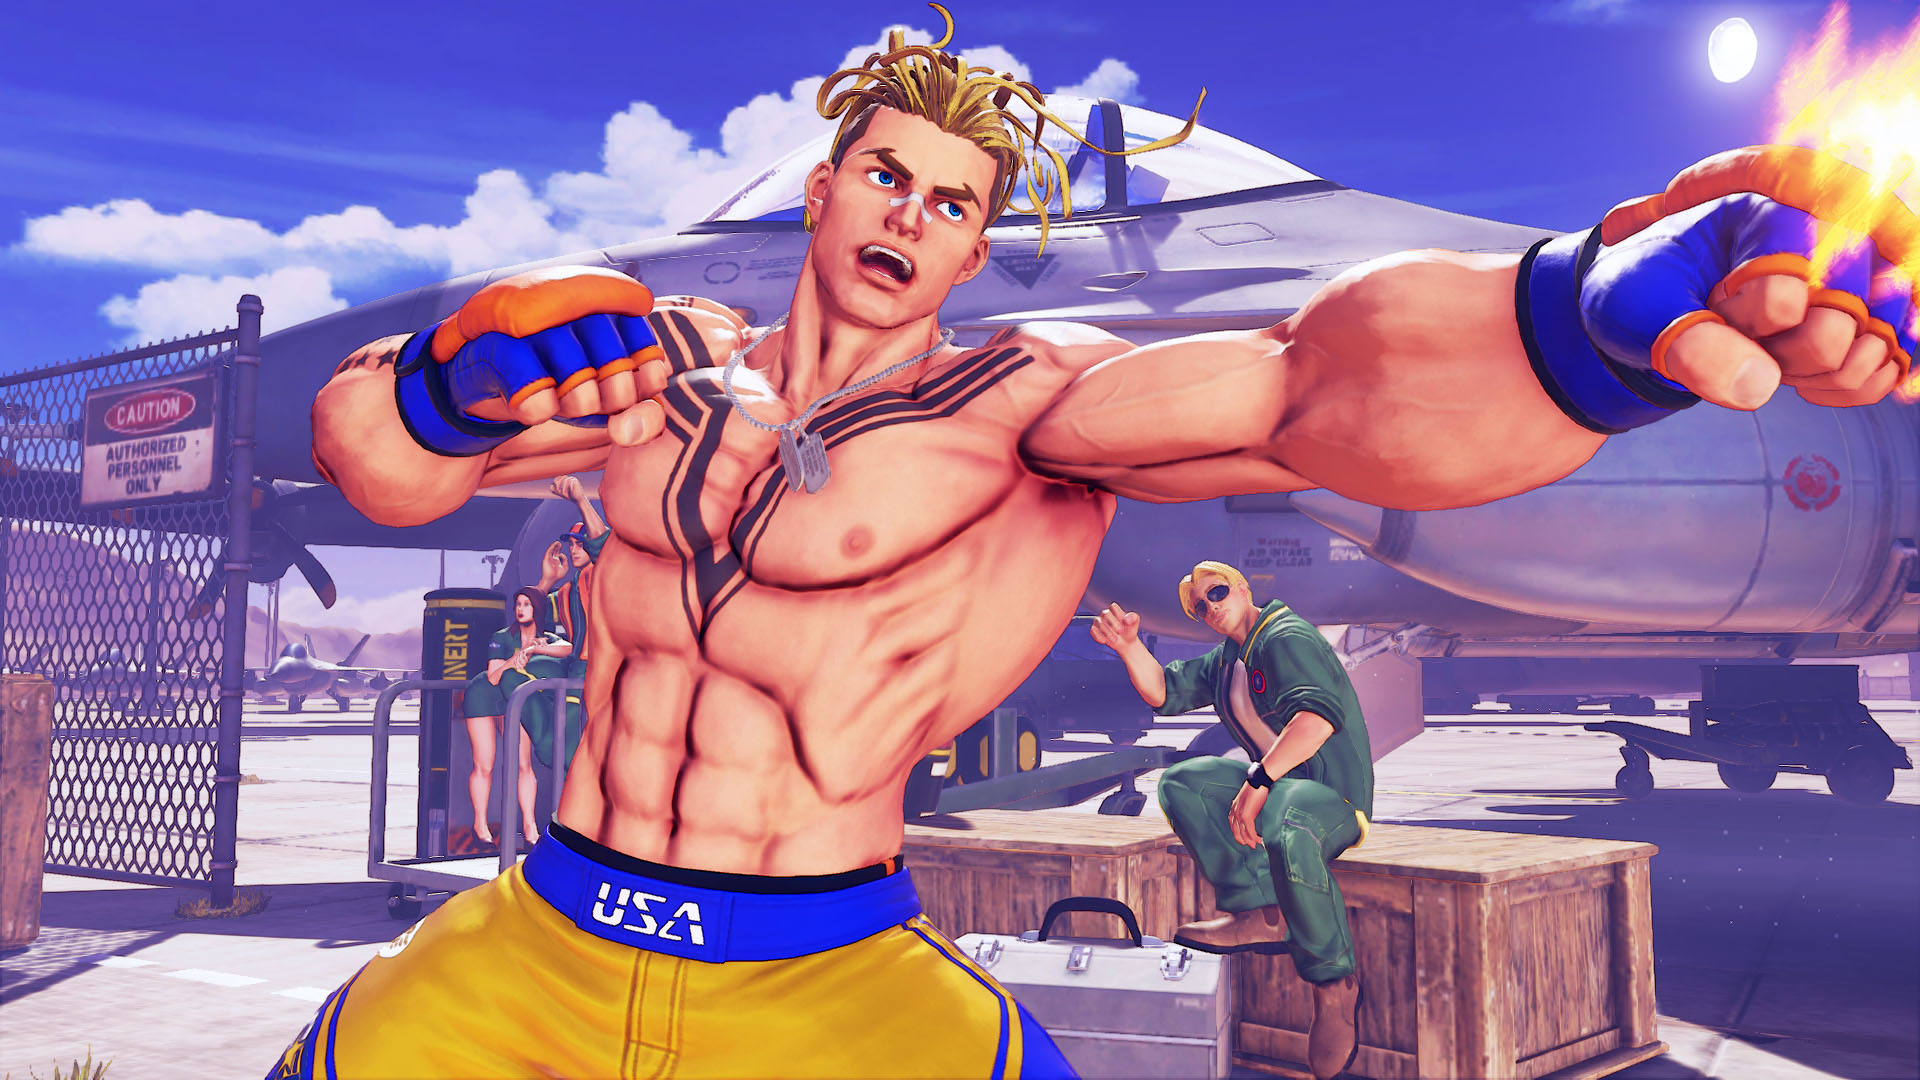 The King of Fighters Allstar'/'Street Fighter V' Crossover Event